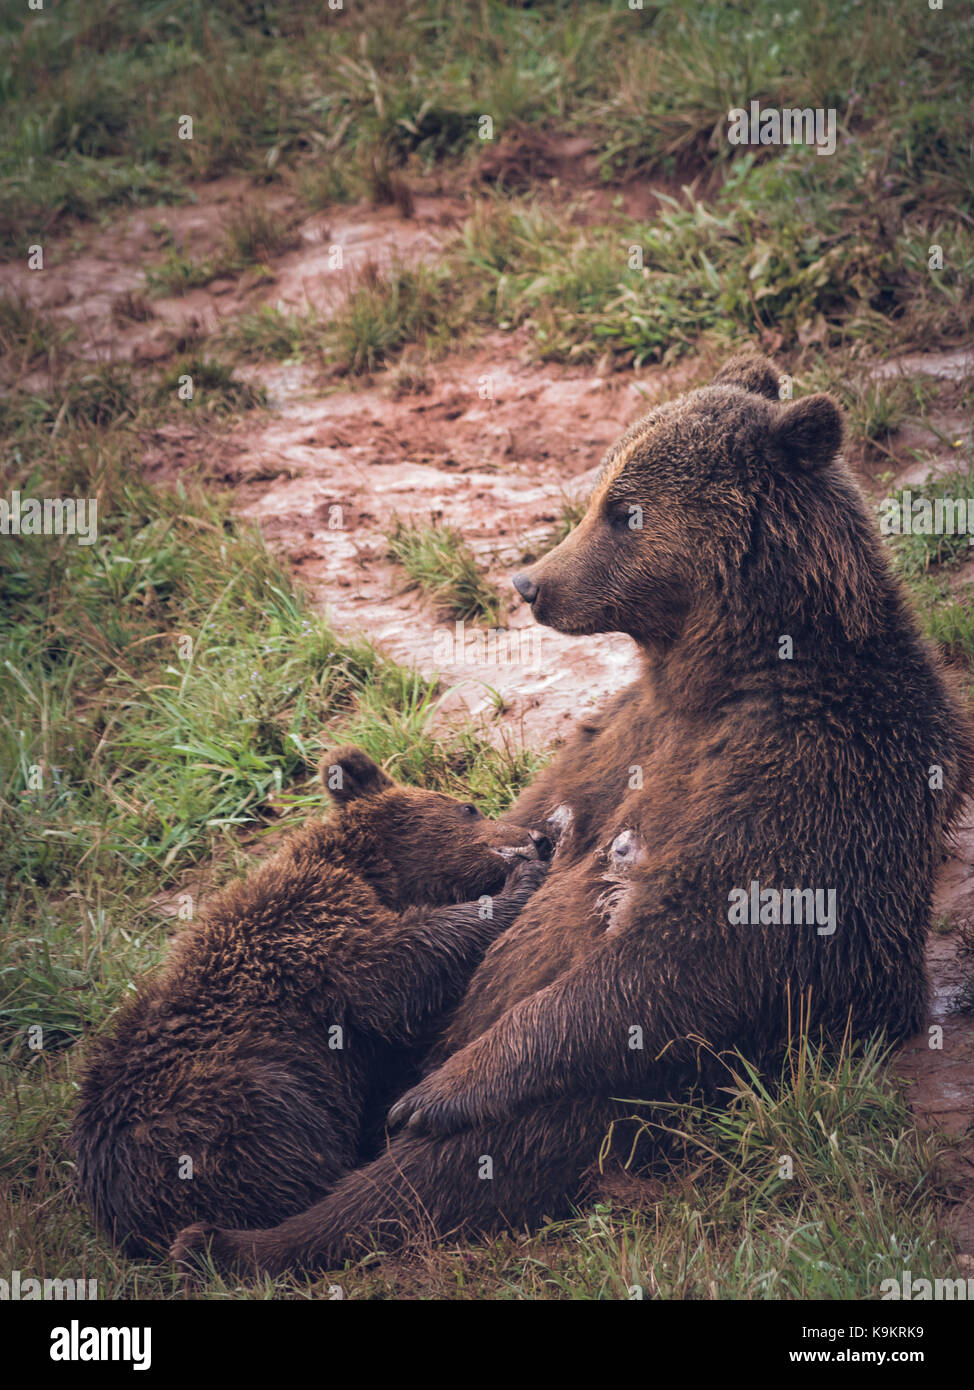 Brown Bear baby drinking milk of your mom in Cabarceno Natural Park, Cantabria, Spain. Stock Photo